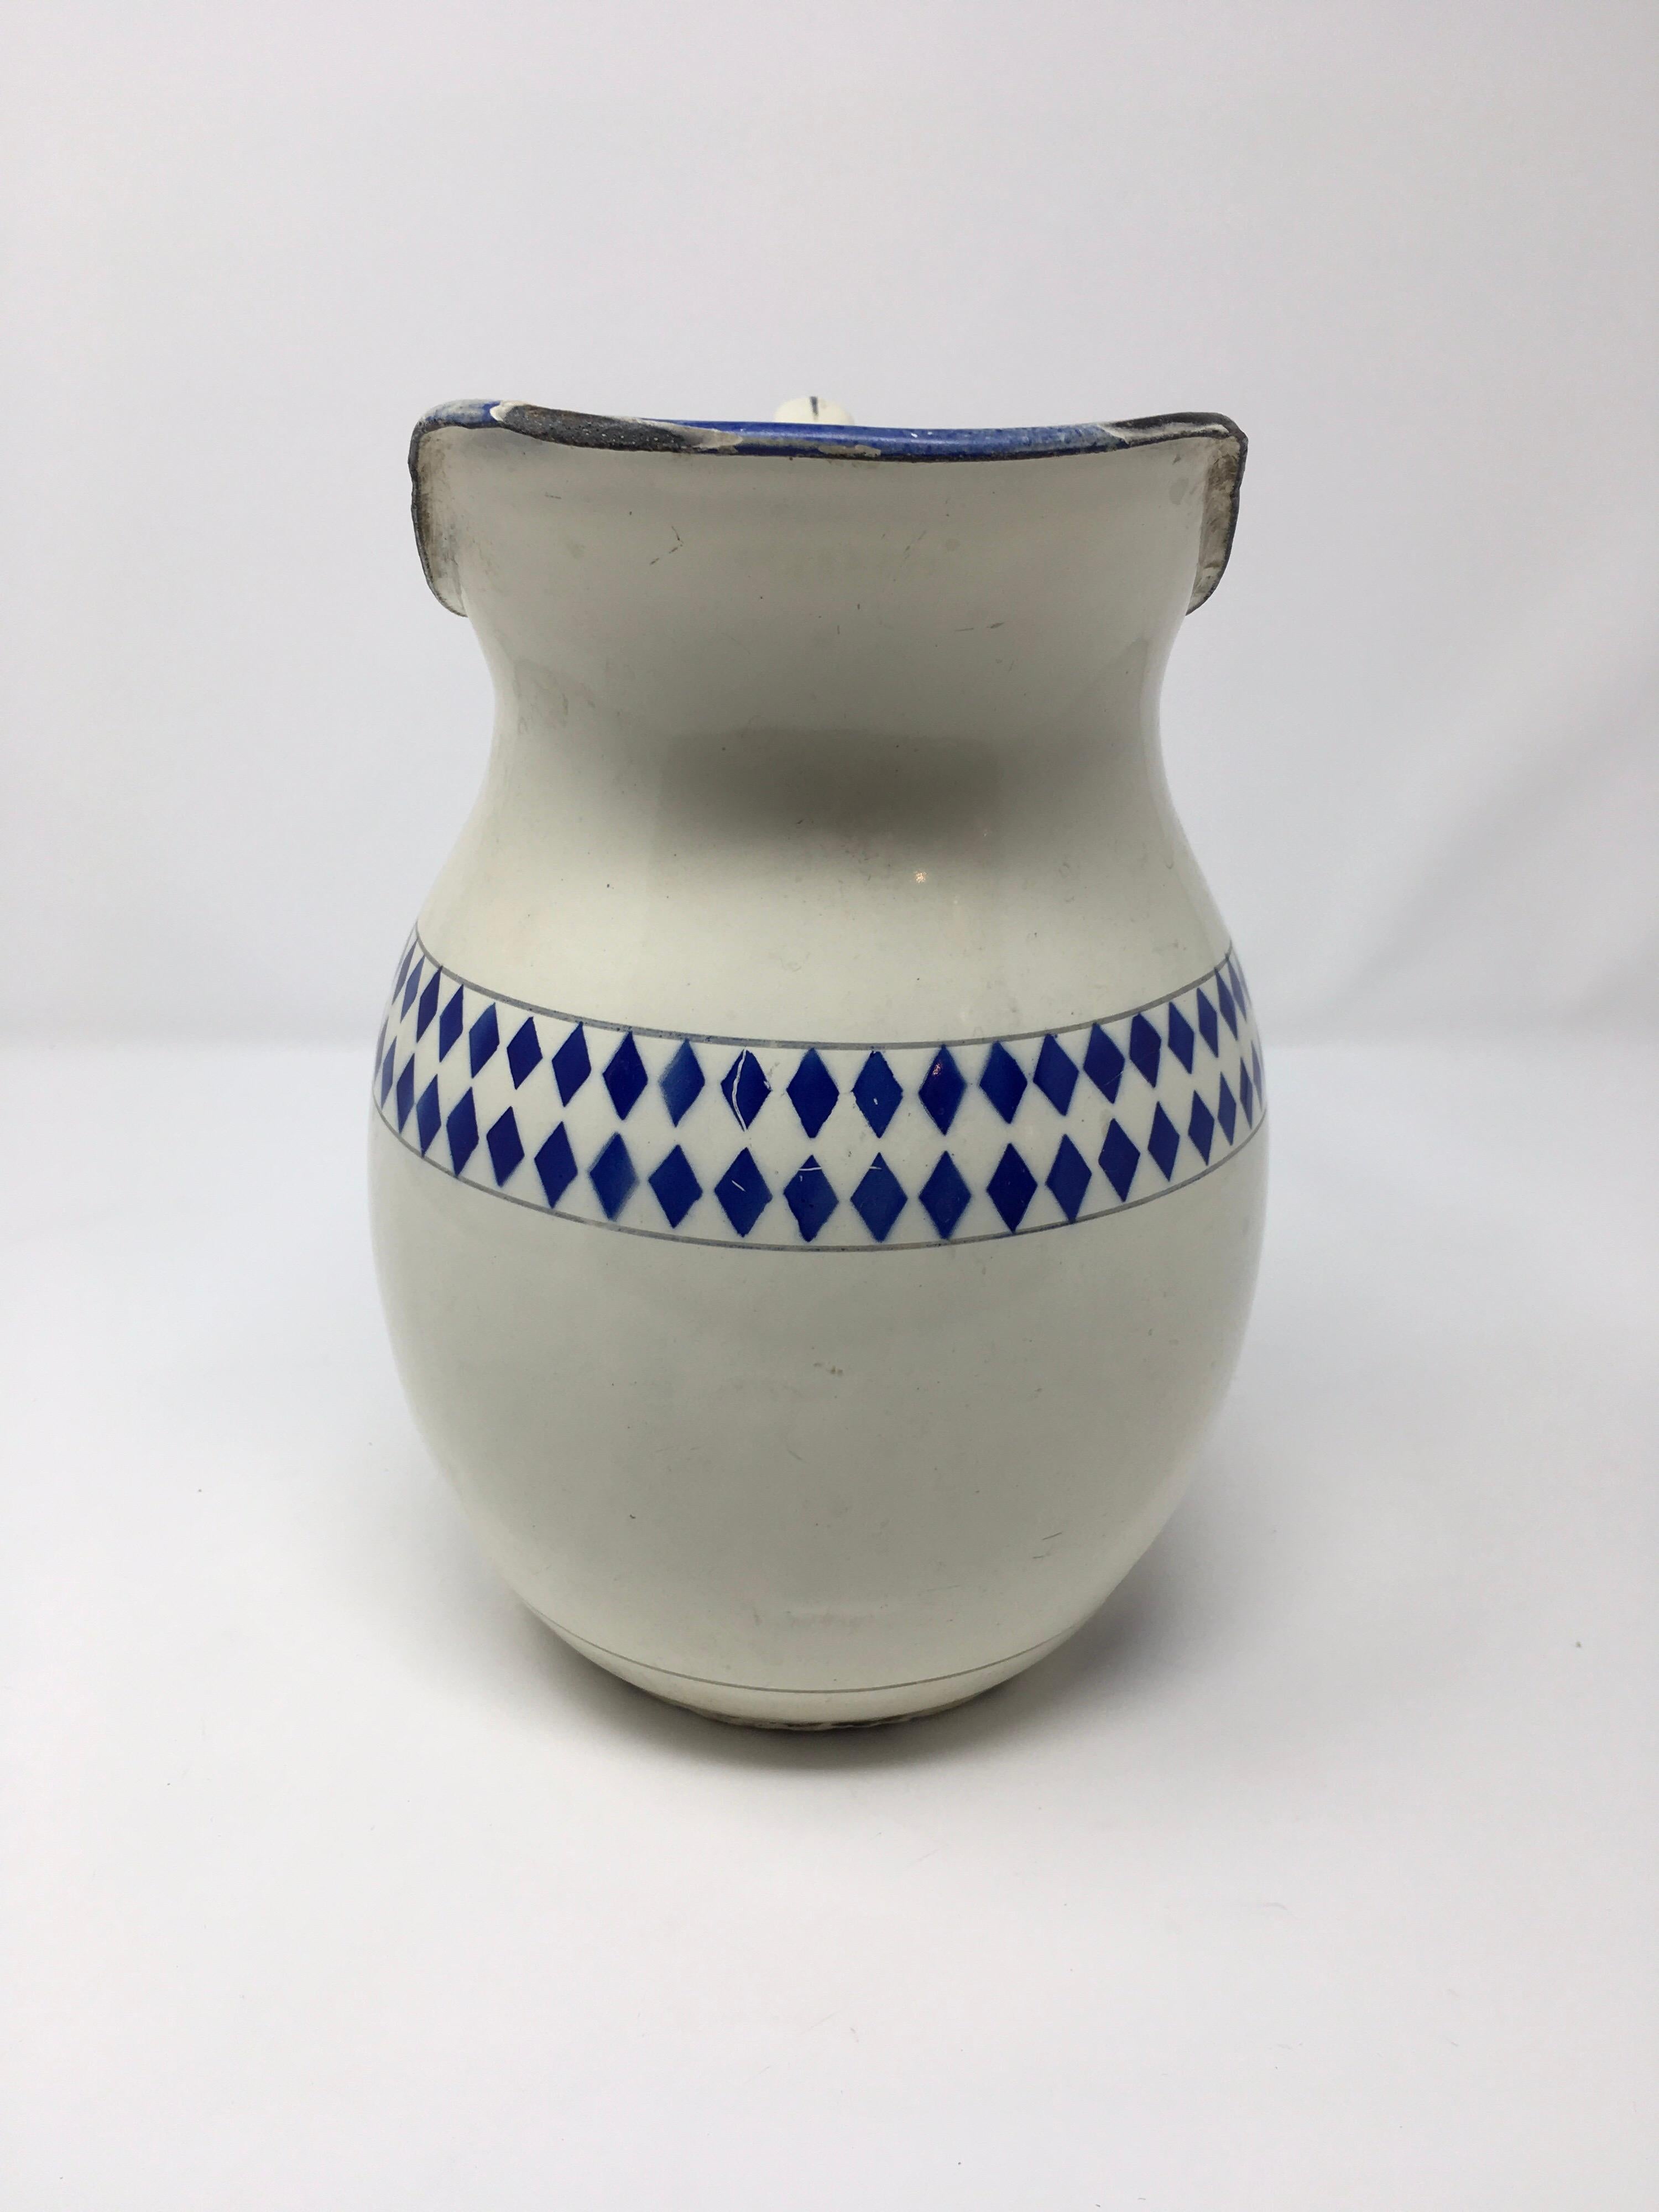 This is a vintage blue and white enamel French pitcher. With the beautiful diamond blue pattern we imagine it filled with sunflowers for a tabletop centerpiece. The pitcher is stabile to hold water as the missing enamel is only on the exterior, the